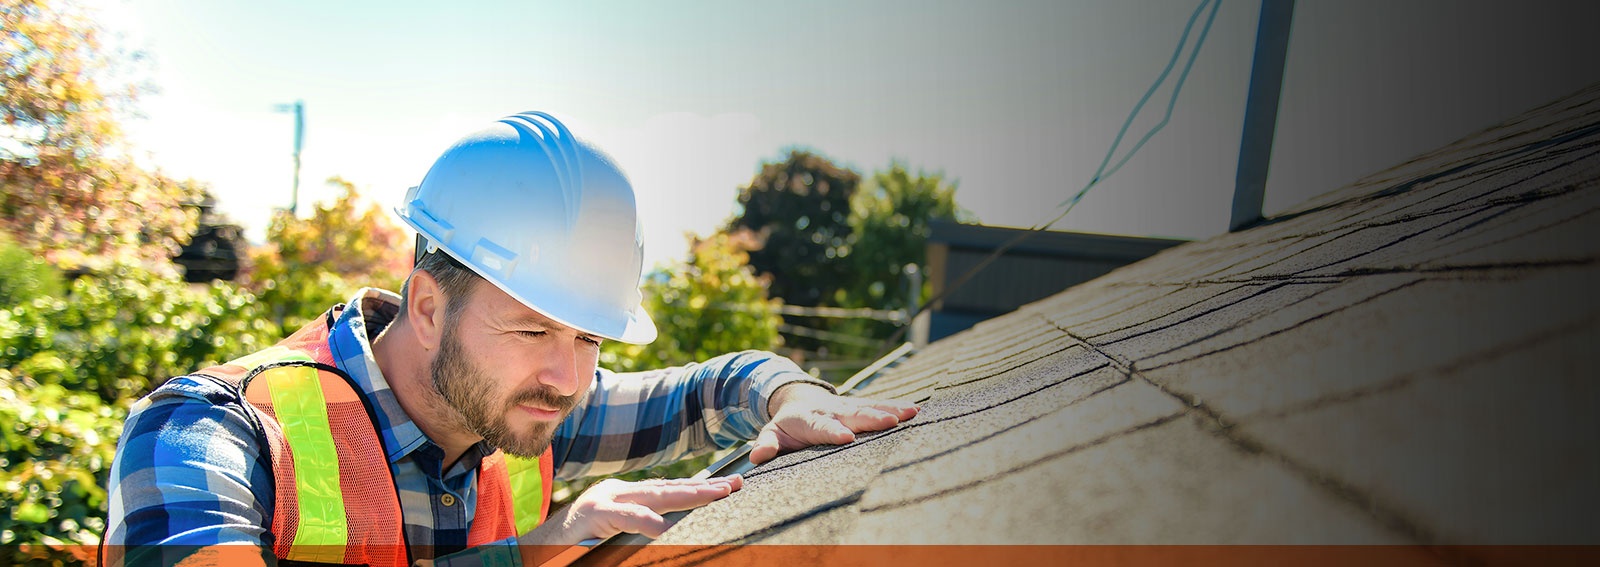 Roofing Inspection Services Central South New Jersey